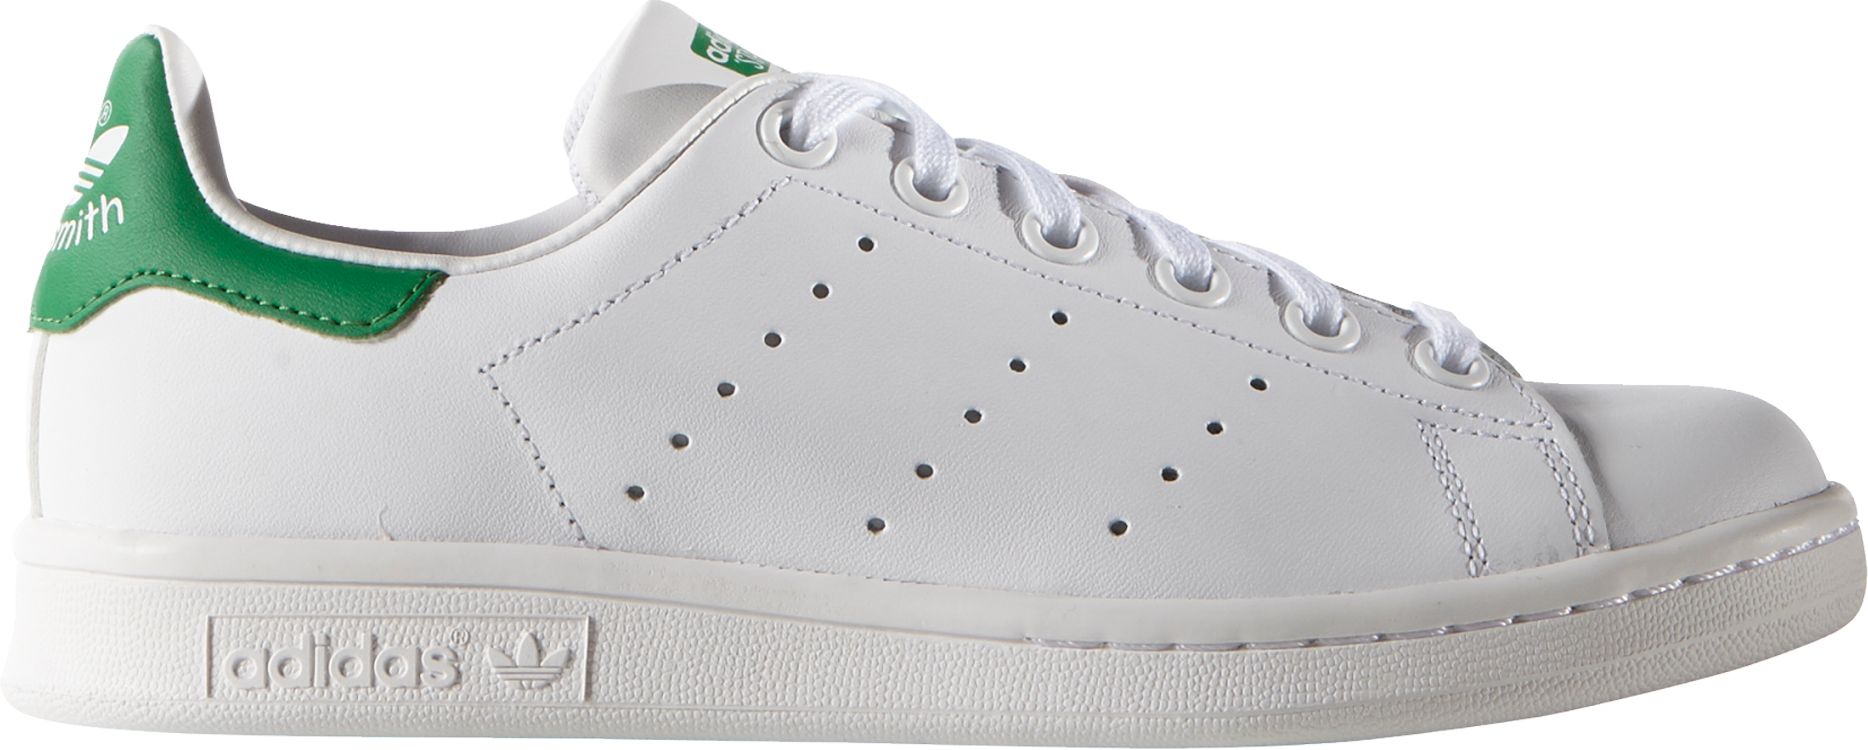 stan smith for kids